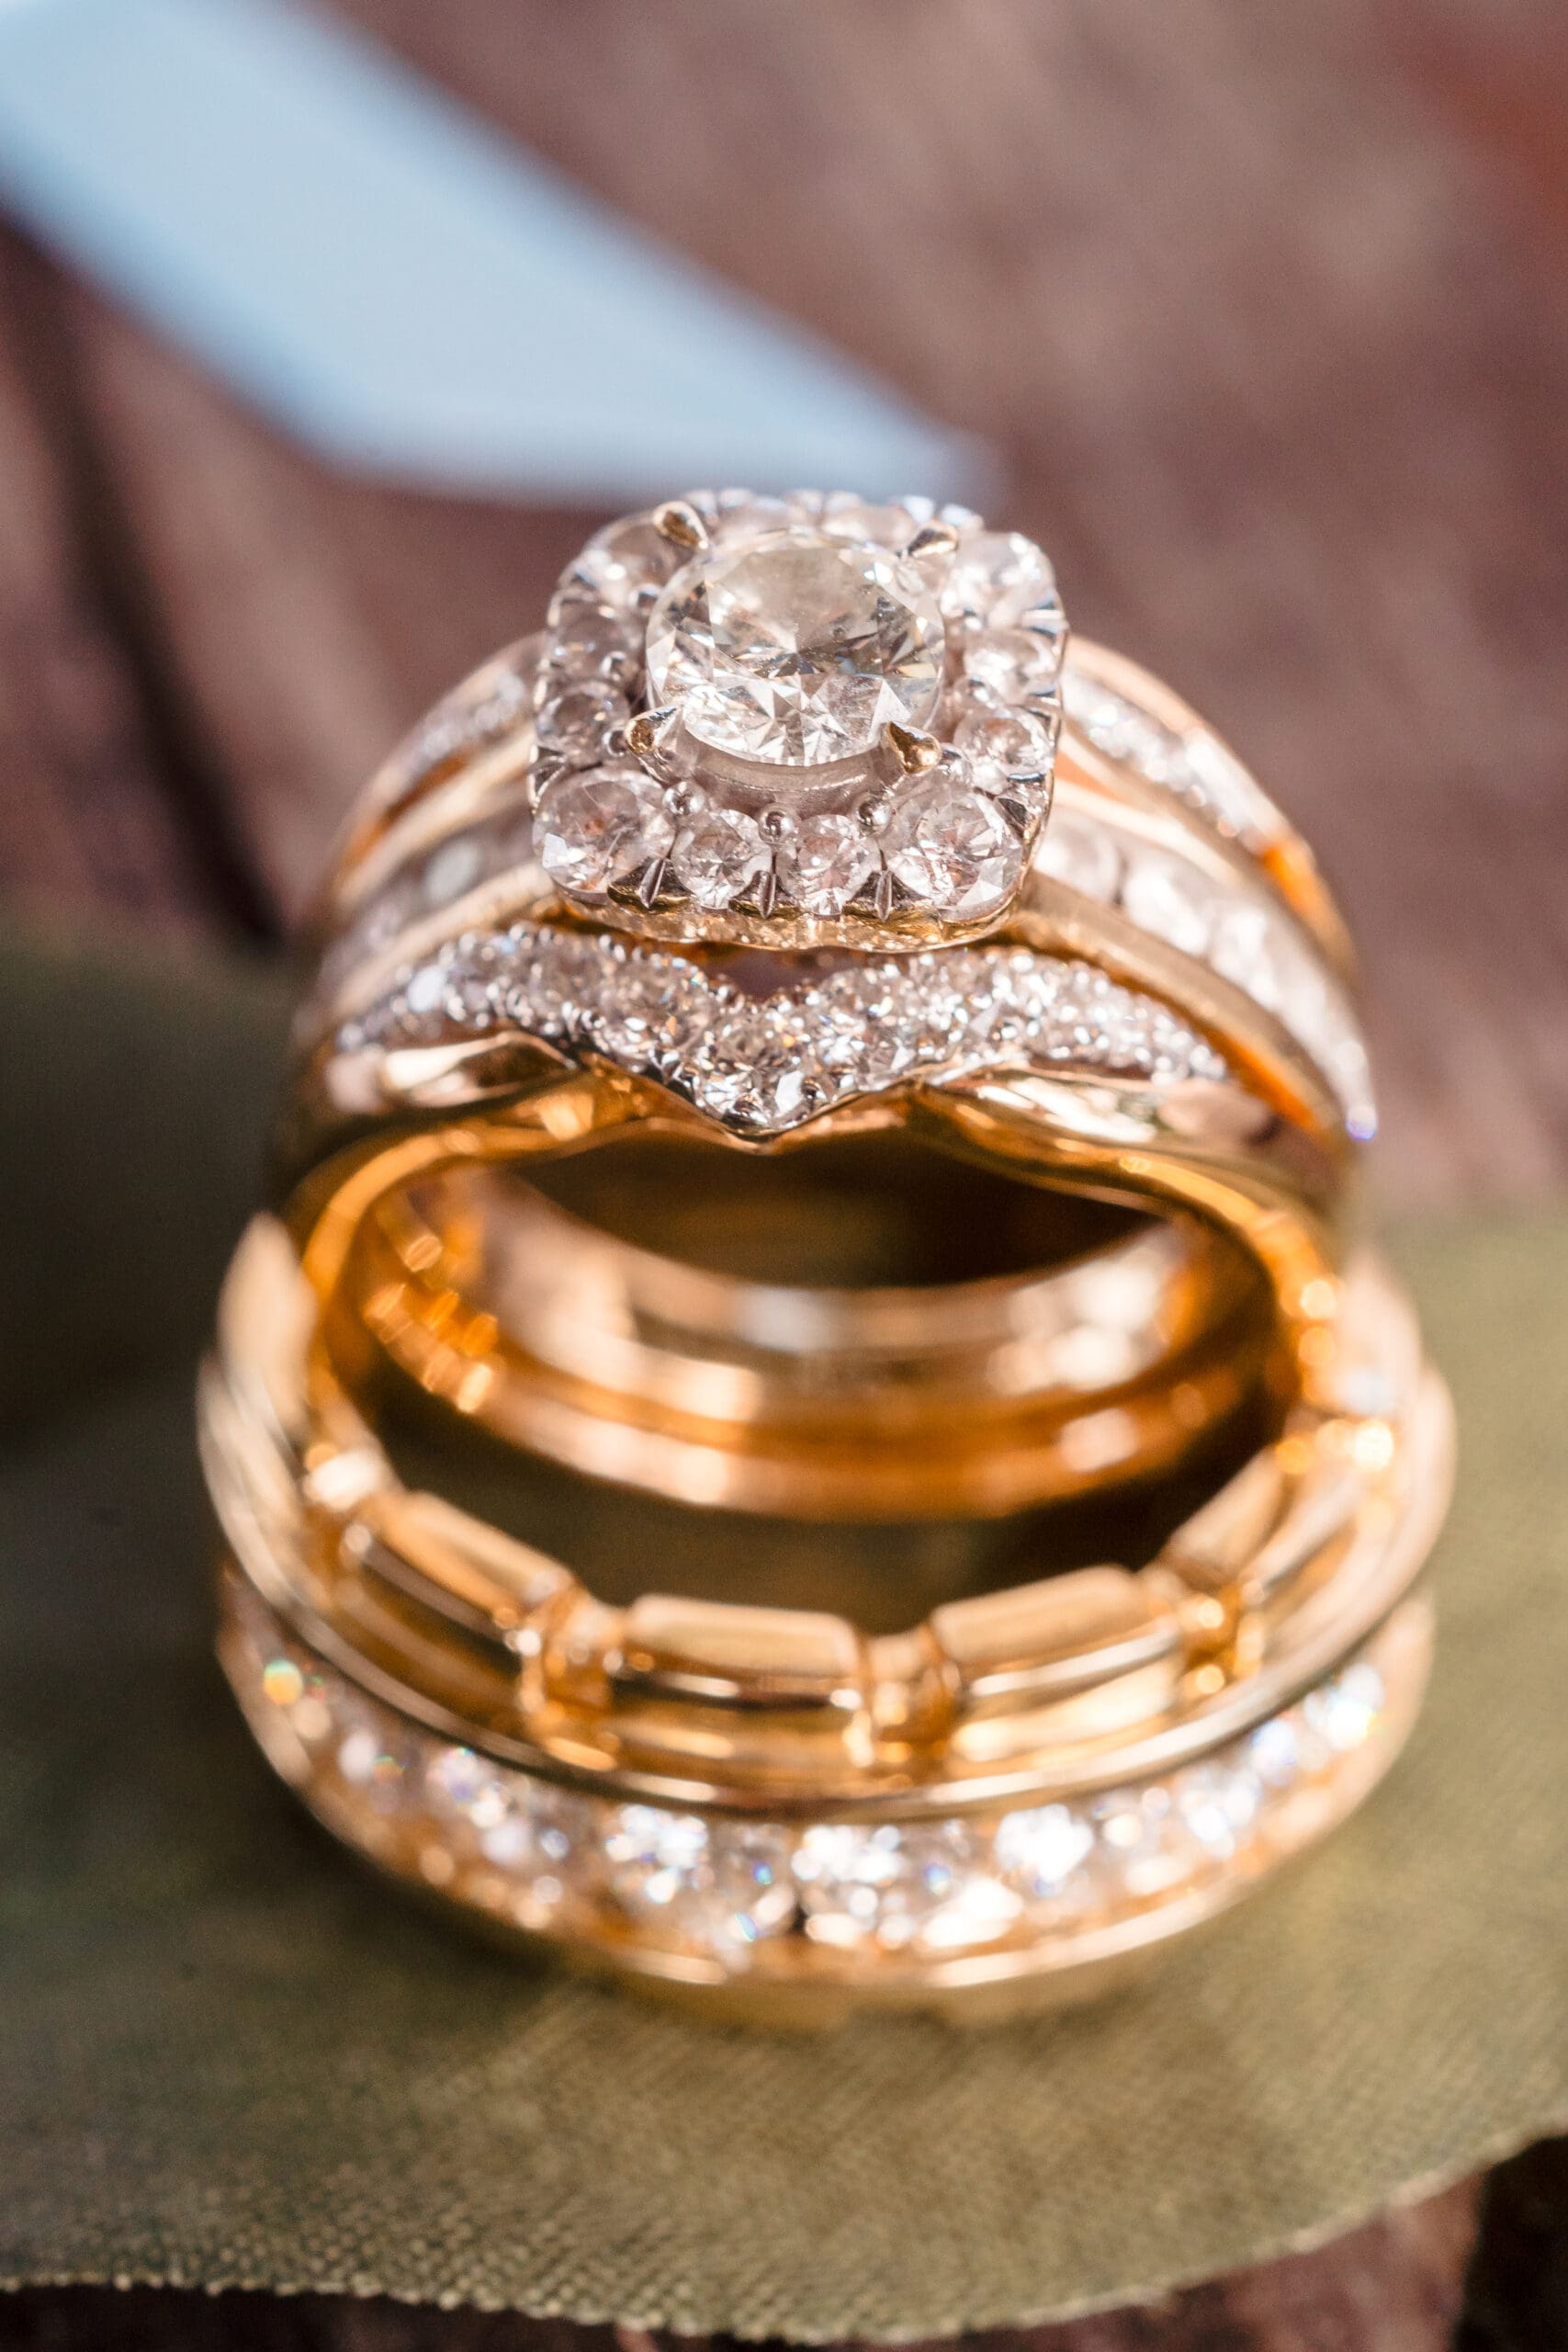 Close-up of Taylor's exquisite wedding ring and band